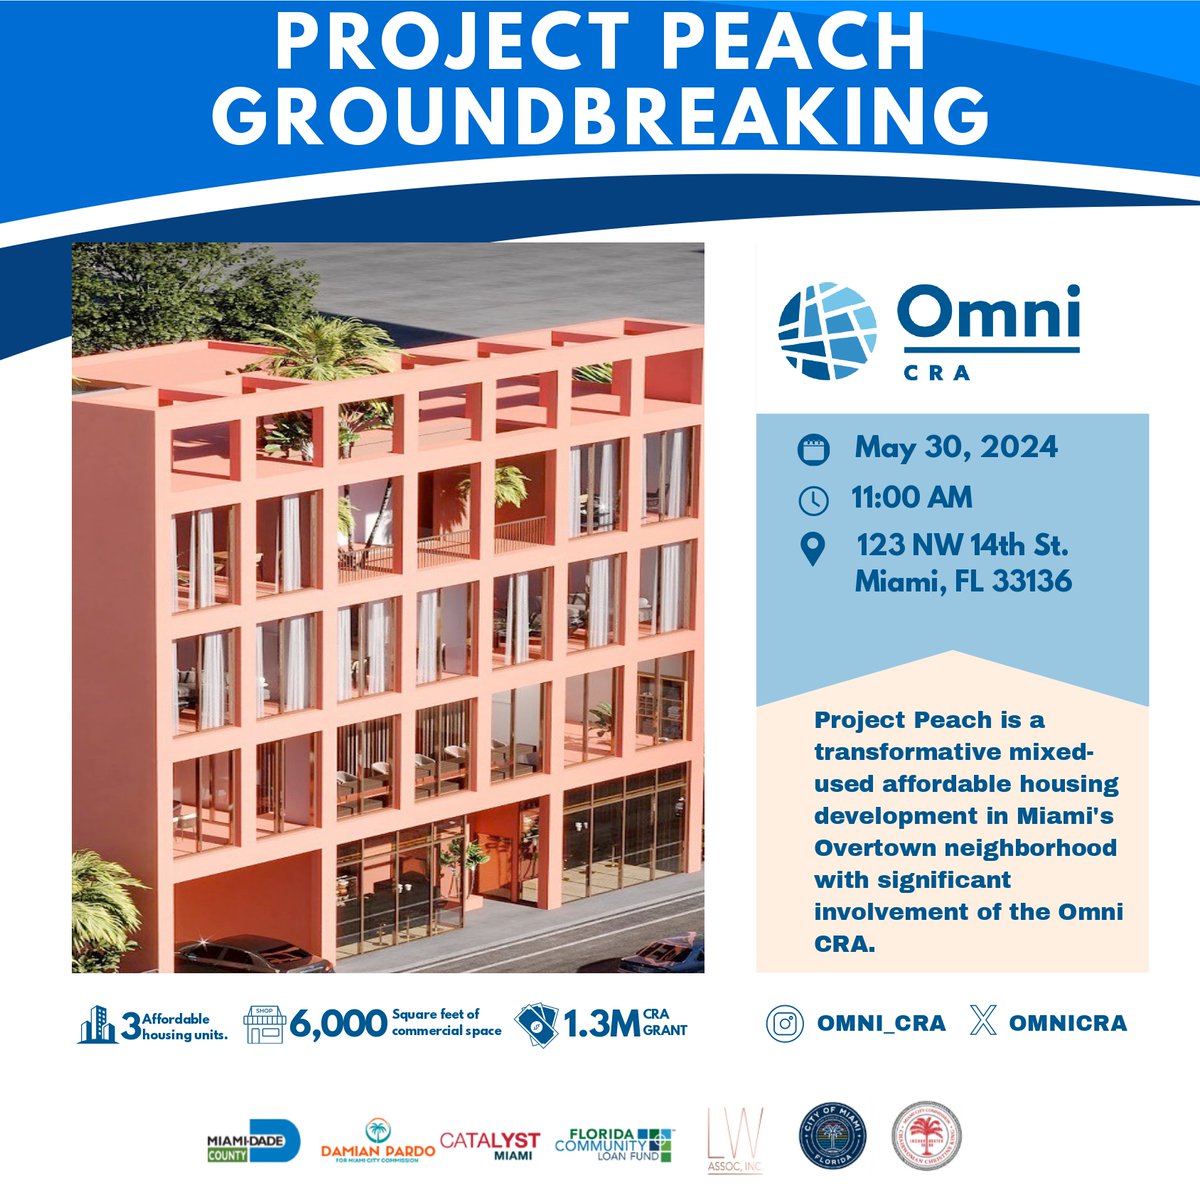 🏗 New Affordable Housing Comes to Overtown! 🏘
The @OmniCRAMiami is breaking ground on Project Peach, a transformative mixed-use development bringing:
✅ 3 affordable housing units
✅ 6,000 sq ft commercial space
✅ Communal rooftop oasis
@OmniCRA 
#ProjectPeach #OmniCRA